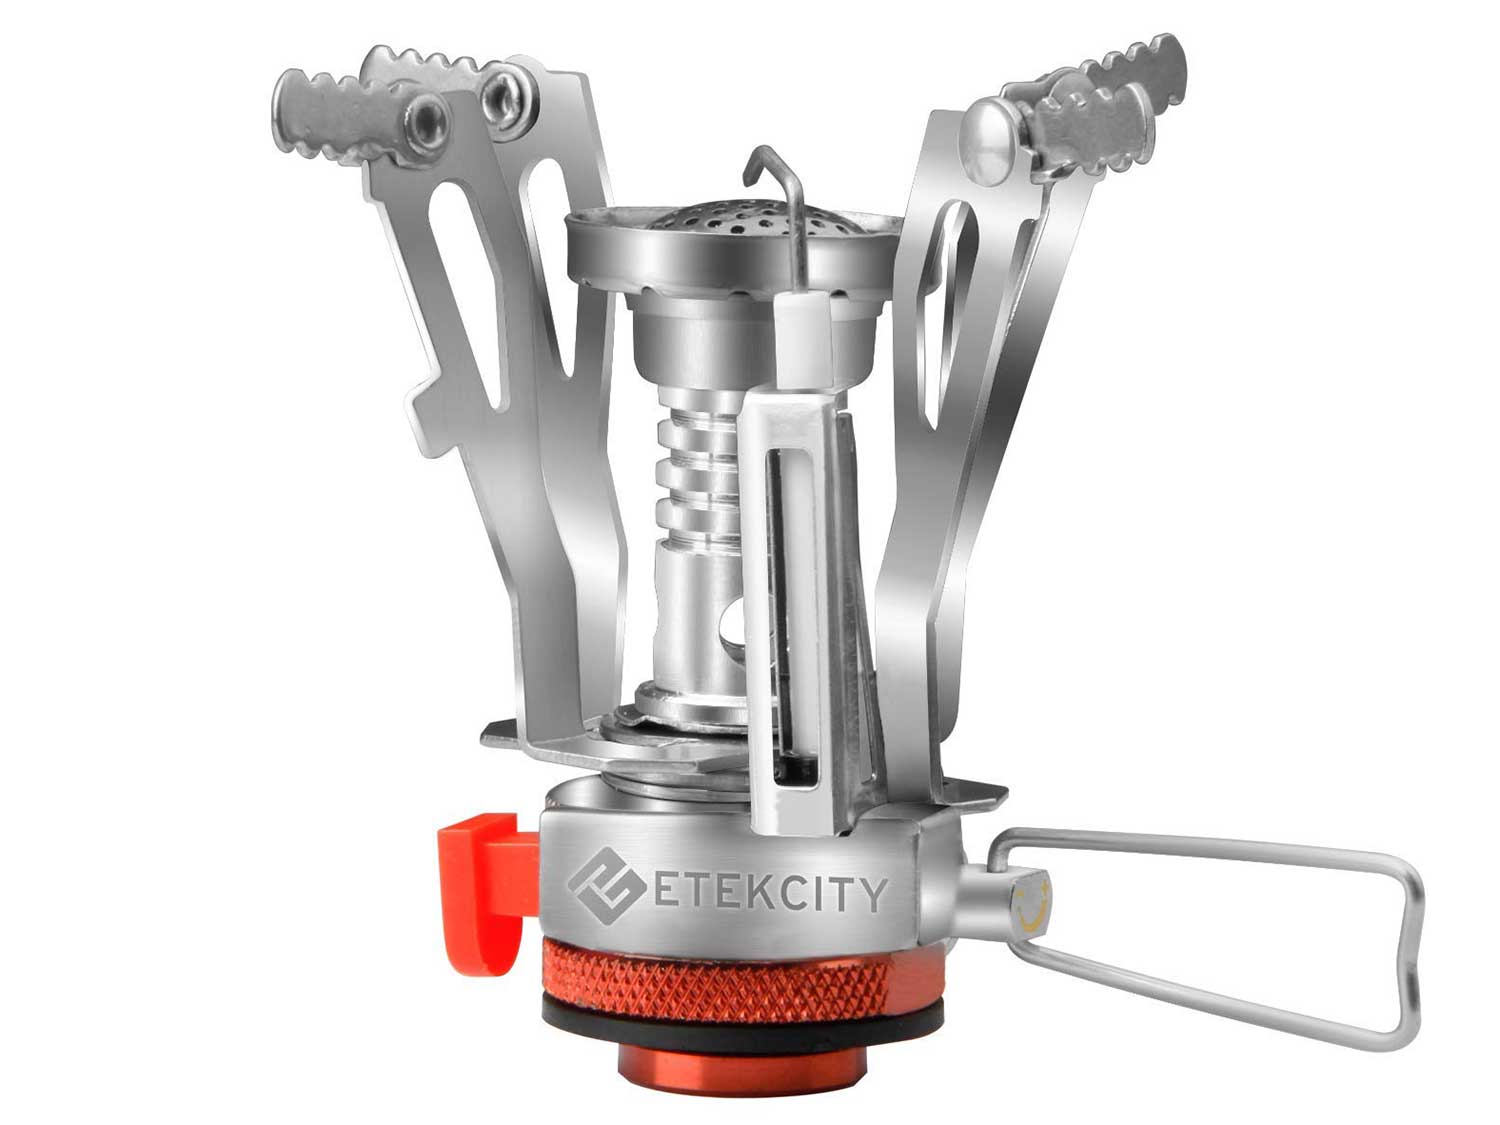 Etekcity Ultralight Portable Backpacking Camping Stove